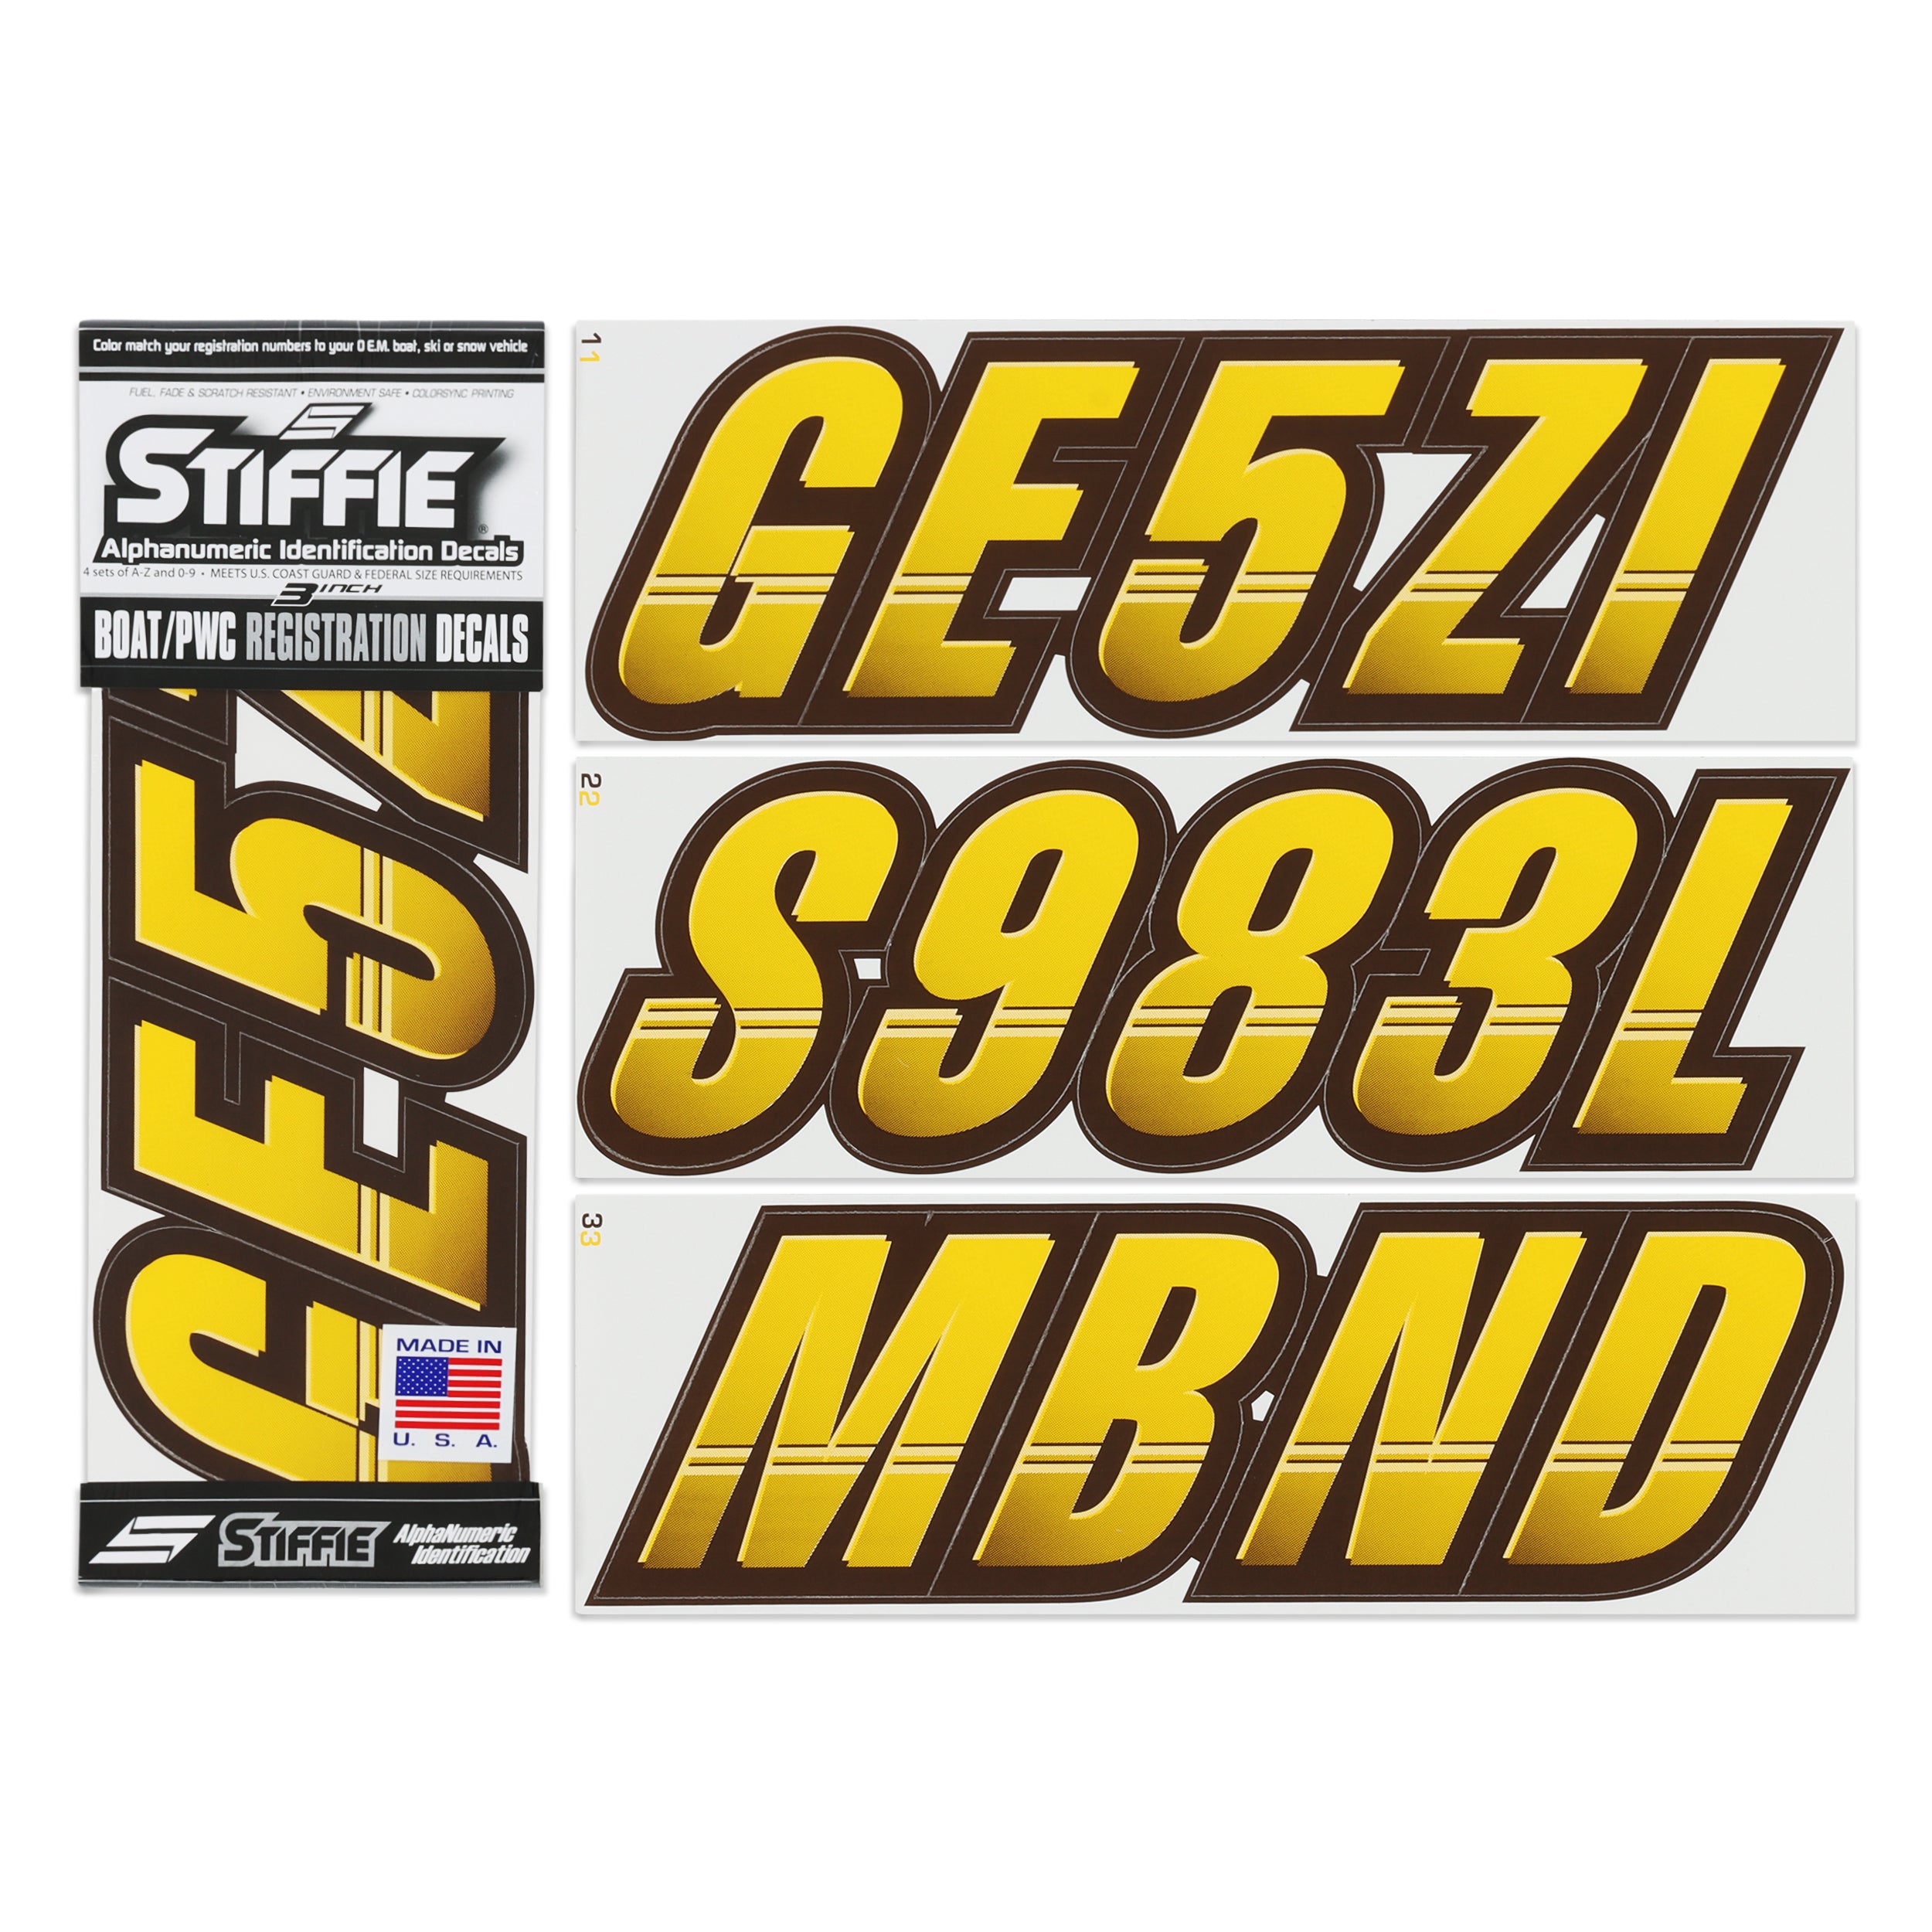 Stiffie Techtron Yellow/Brown 3" Alpha-Numeric Registration Identification Numbers Stickers Decals for Boats & Personal Watercraft